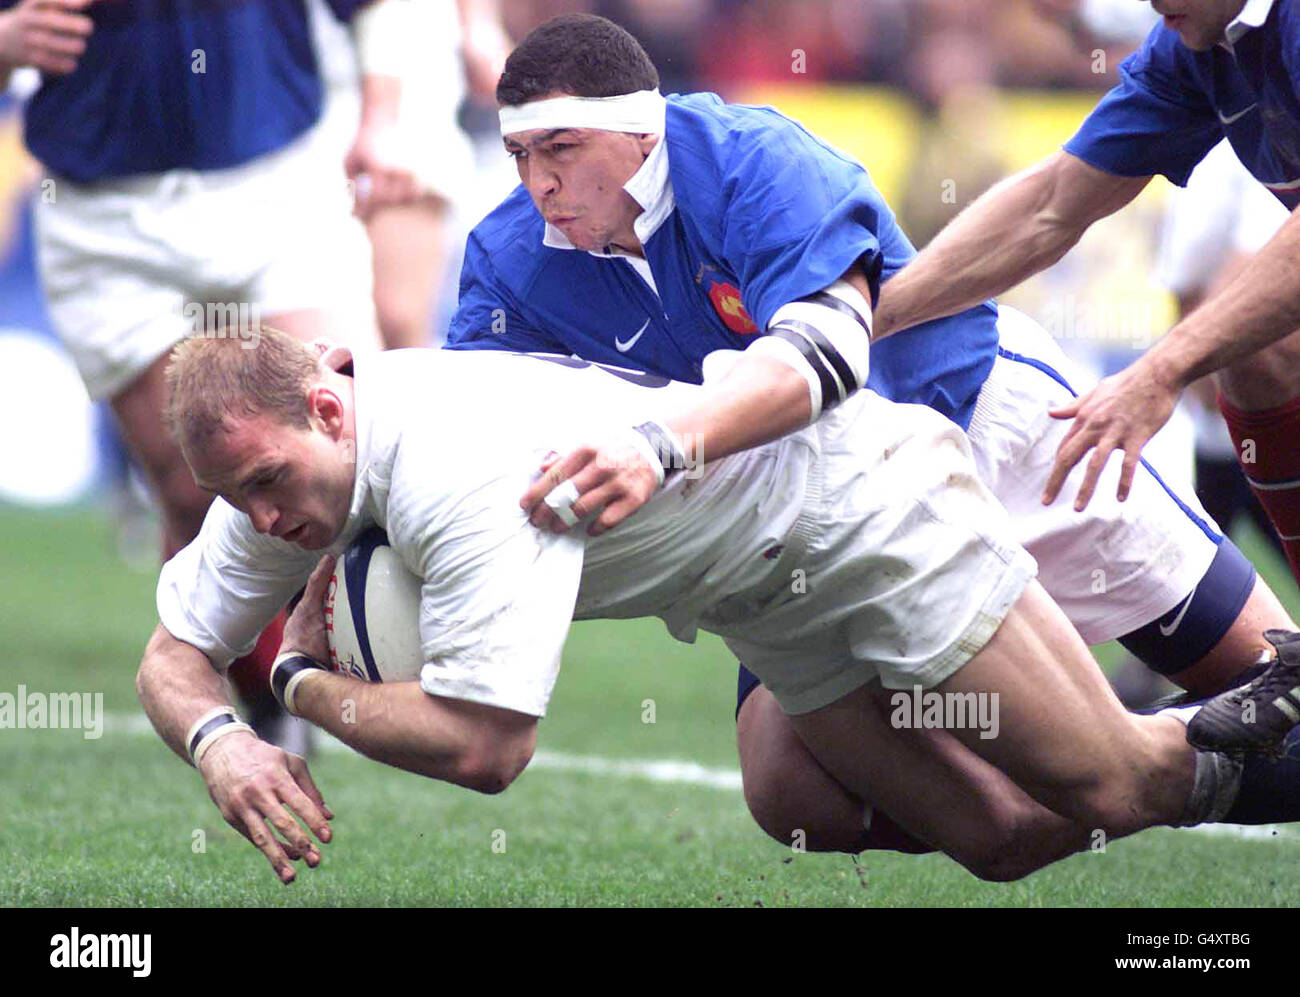 England's Lawrence Dallaglio is brought down by Frenchman Abdelatif Benazzi (blue) duirng the France v England Six Nations rugby match. Stock Photo